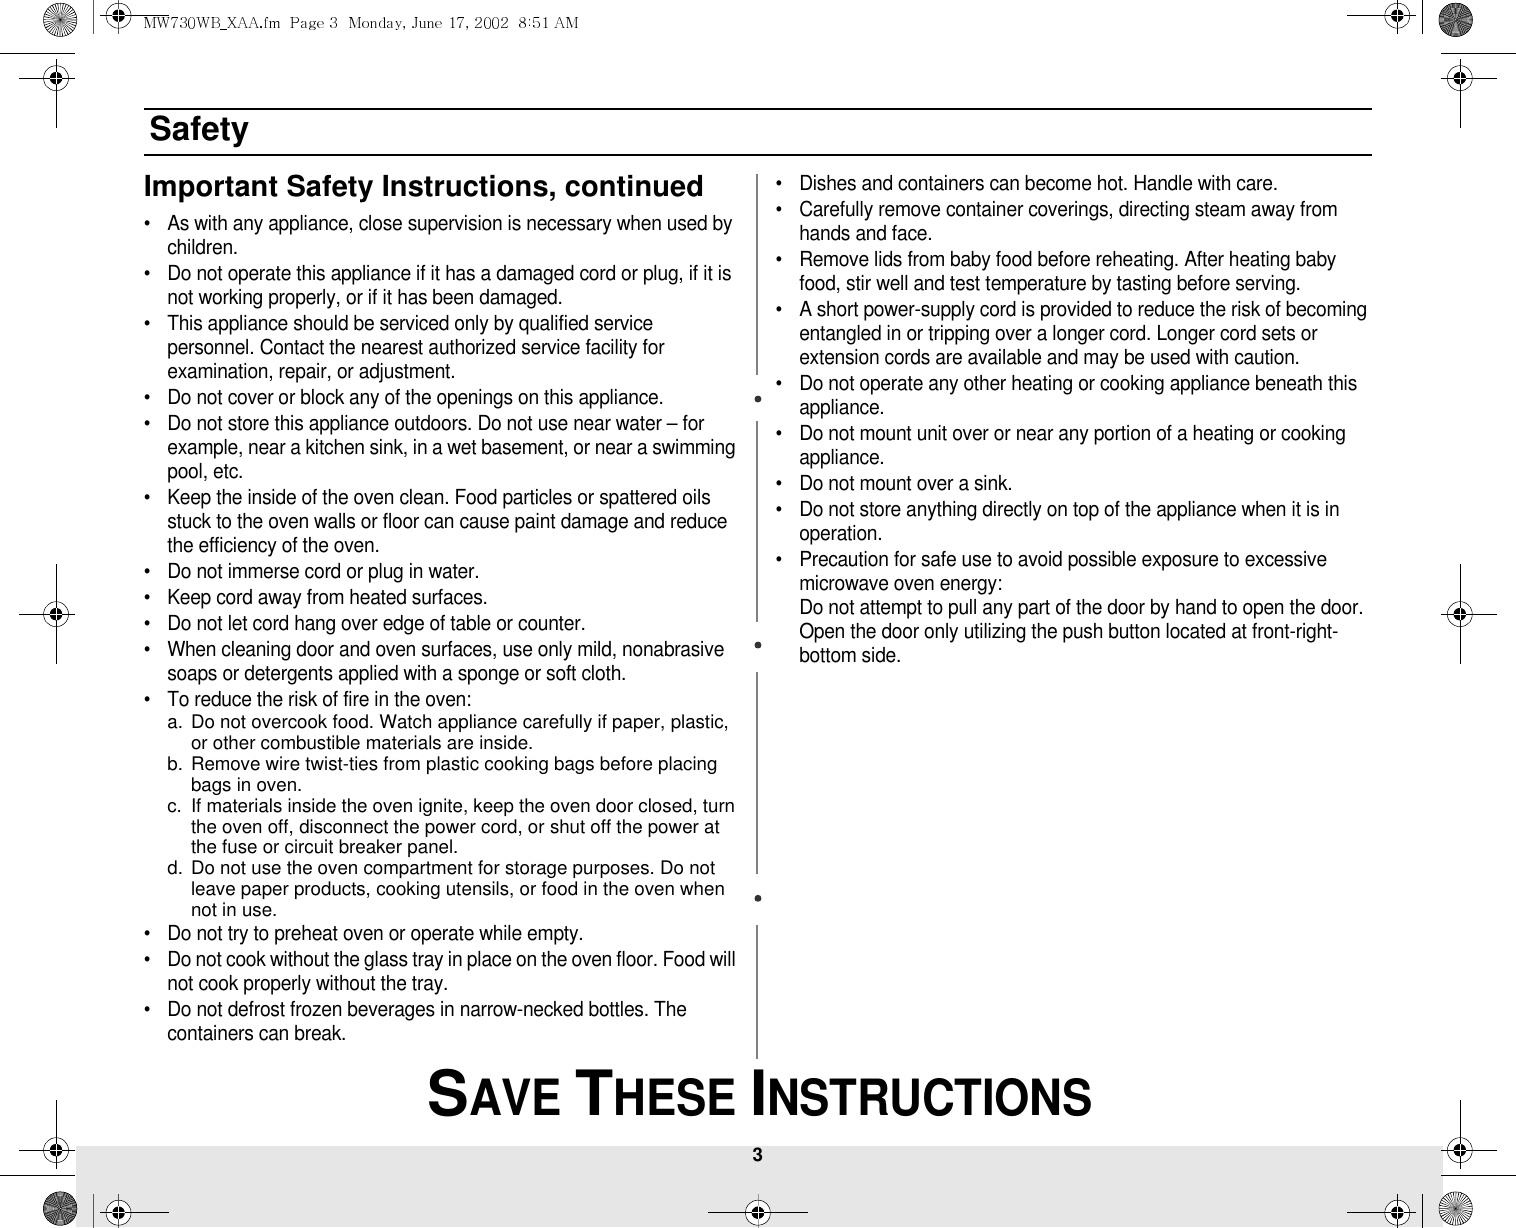 3 SAVE THESE INSTRUCTIONSSafetyImportant Safety Instructions, continued• As with any appliance, close supervision is necessary when used by children.• Do not operate this appliance if it has a damaged cord or plug, if it is not working properly, or if it has been damaged.• This appliance should be serviced only by qualified service personnel. Contact the nearest authorized service facility for examination, repair, or adjustment.• Do not cover or block any of the openings on this appliance.• Do not store this appliance outdoors. Do not use near water – for example, near a kitchen sink, in a wet basement, or near a swimming pool, etc. • Keep the inside of the oven clean. Food particles or spattered oils stuck to the oven walls or floor can cause paint damage and reduce the efficiency of the oven.• Do not immerse cord or plug in water.• Keep cord away from heated surfaces.• Do not let cord hang over edge of table or counter.• When cleaning door and oven surfaces, use only mild, nonabrasive soaps or detergents applied with a sponge or soft cloth.• To reduce the risk of fire in the oven:a. Do not overcook food. Watch appliance carefully if paper, plastic, or other combustible materials are inside.b. Remove wire twist-ties from plastic cooking bags before placing bags in oven.c. If materials inside the oven ignite, keep the oven door closed, turn the oven off, disconnect the power cord, or shut off the power at the fuse or circuit breaker panel.d. Do not use the oven compartment for storage purposes. Do not leave paper products, cooking utensils, or food in the oven when not in use.• Do not try to preheat oven or operate while empty.• Do not cook without the glass tray in place on the oven floor. Food will not cook properly without the tray.• Do not defrost frozen beverages in narrow-necked bottles. The containers can break.• Dishes and containers can become hot. Handle with care.• Carefully remove container coverings, directing steam away from hands and face.• Remove lids from baby food before reheating. After heating baby food, stir well and test temperature by tasting before serving.• A short power-supply cord is provided to reduce the risk of becoming entangled in or tripping over a longer cord. Longer cord sets or extension cords are available and may be used with caution. • Do not operate any other heating or cooking appliance beneath this appliance.• Do not mount unit over or near any portion of a heating or cooking appliance.• Do not mount over a sink.• Do not store anything directly on top of the appliance when it is in operation.• Precaution for safe use to avoid possible exposure to excessive microwave oven energy:Do not attempt to pull any part of the door by hand to open the door. Open the door only utilizing the push button located at front-right-bottom side.